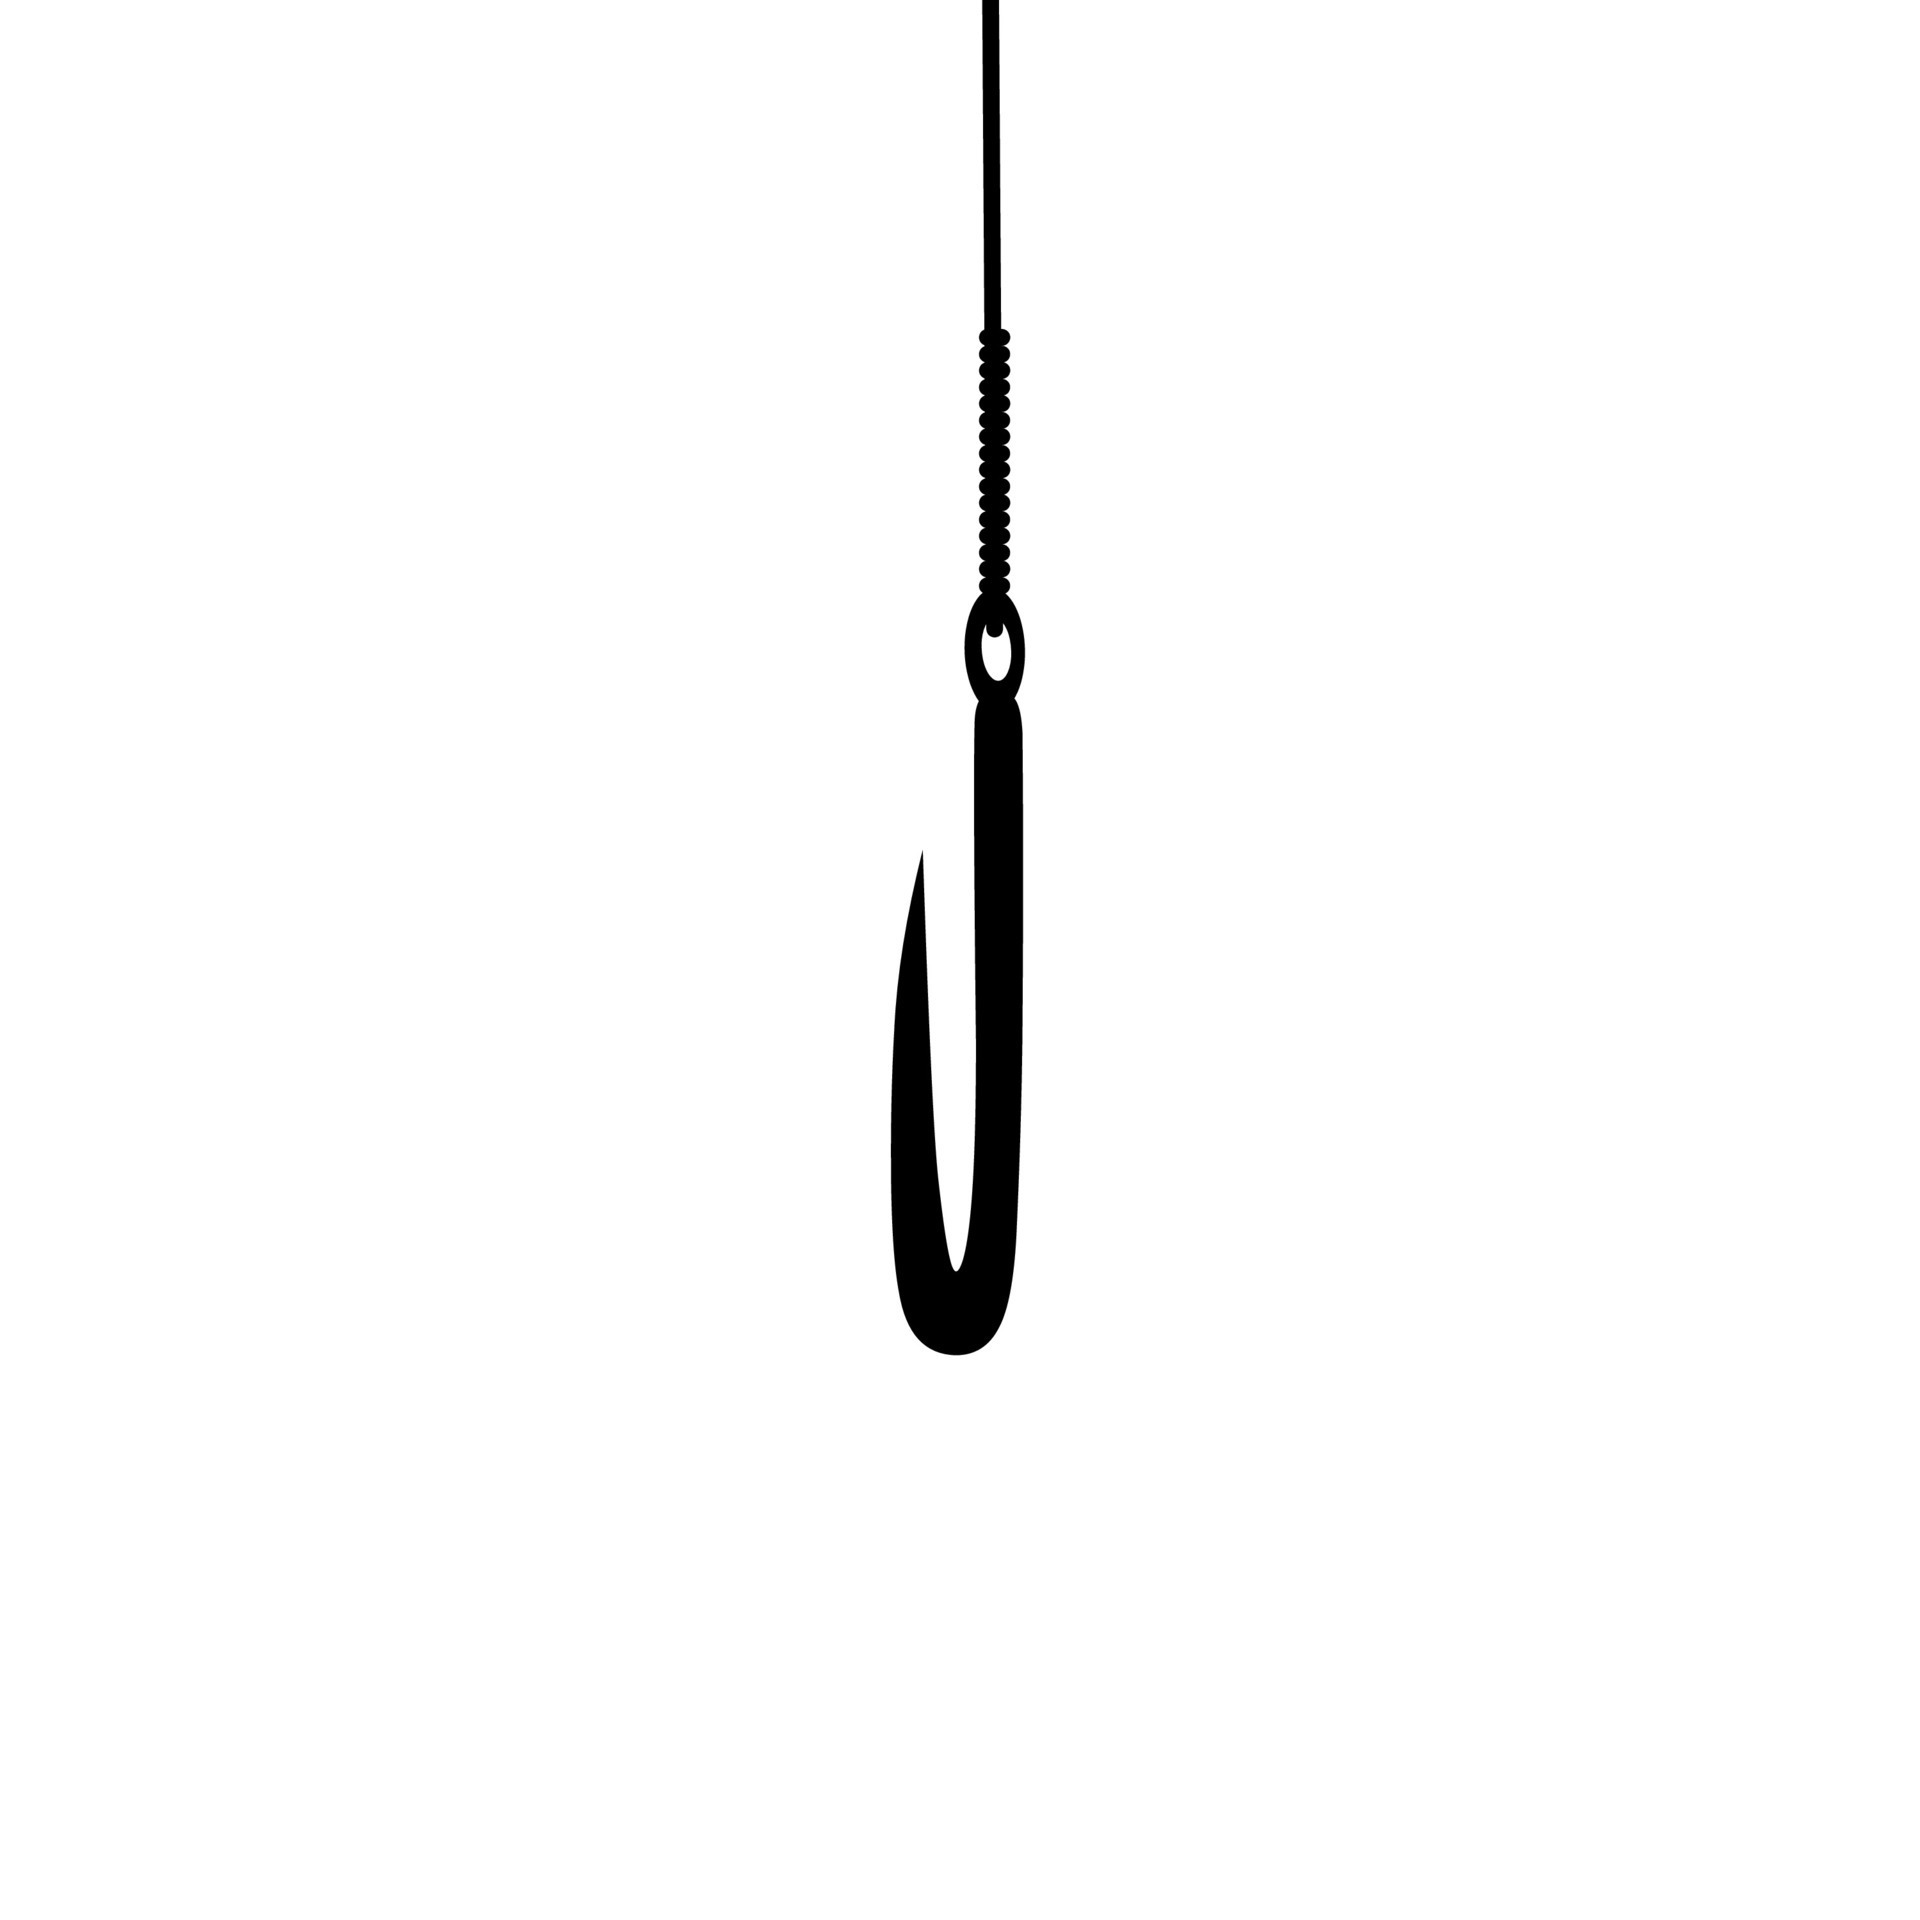 Pancil hooks on a white background. Silhouette of fishing rod with